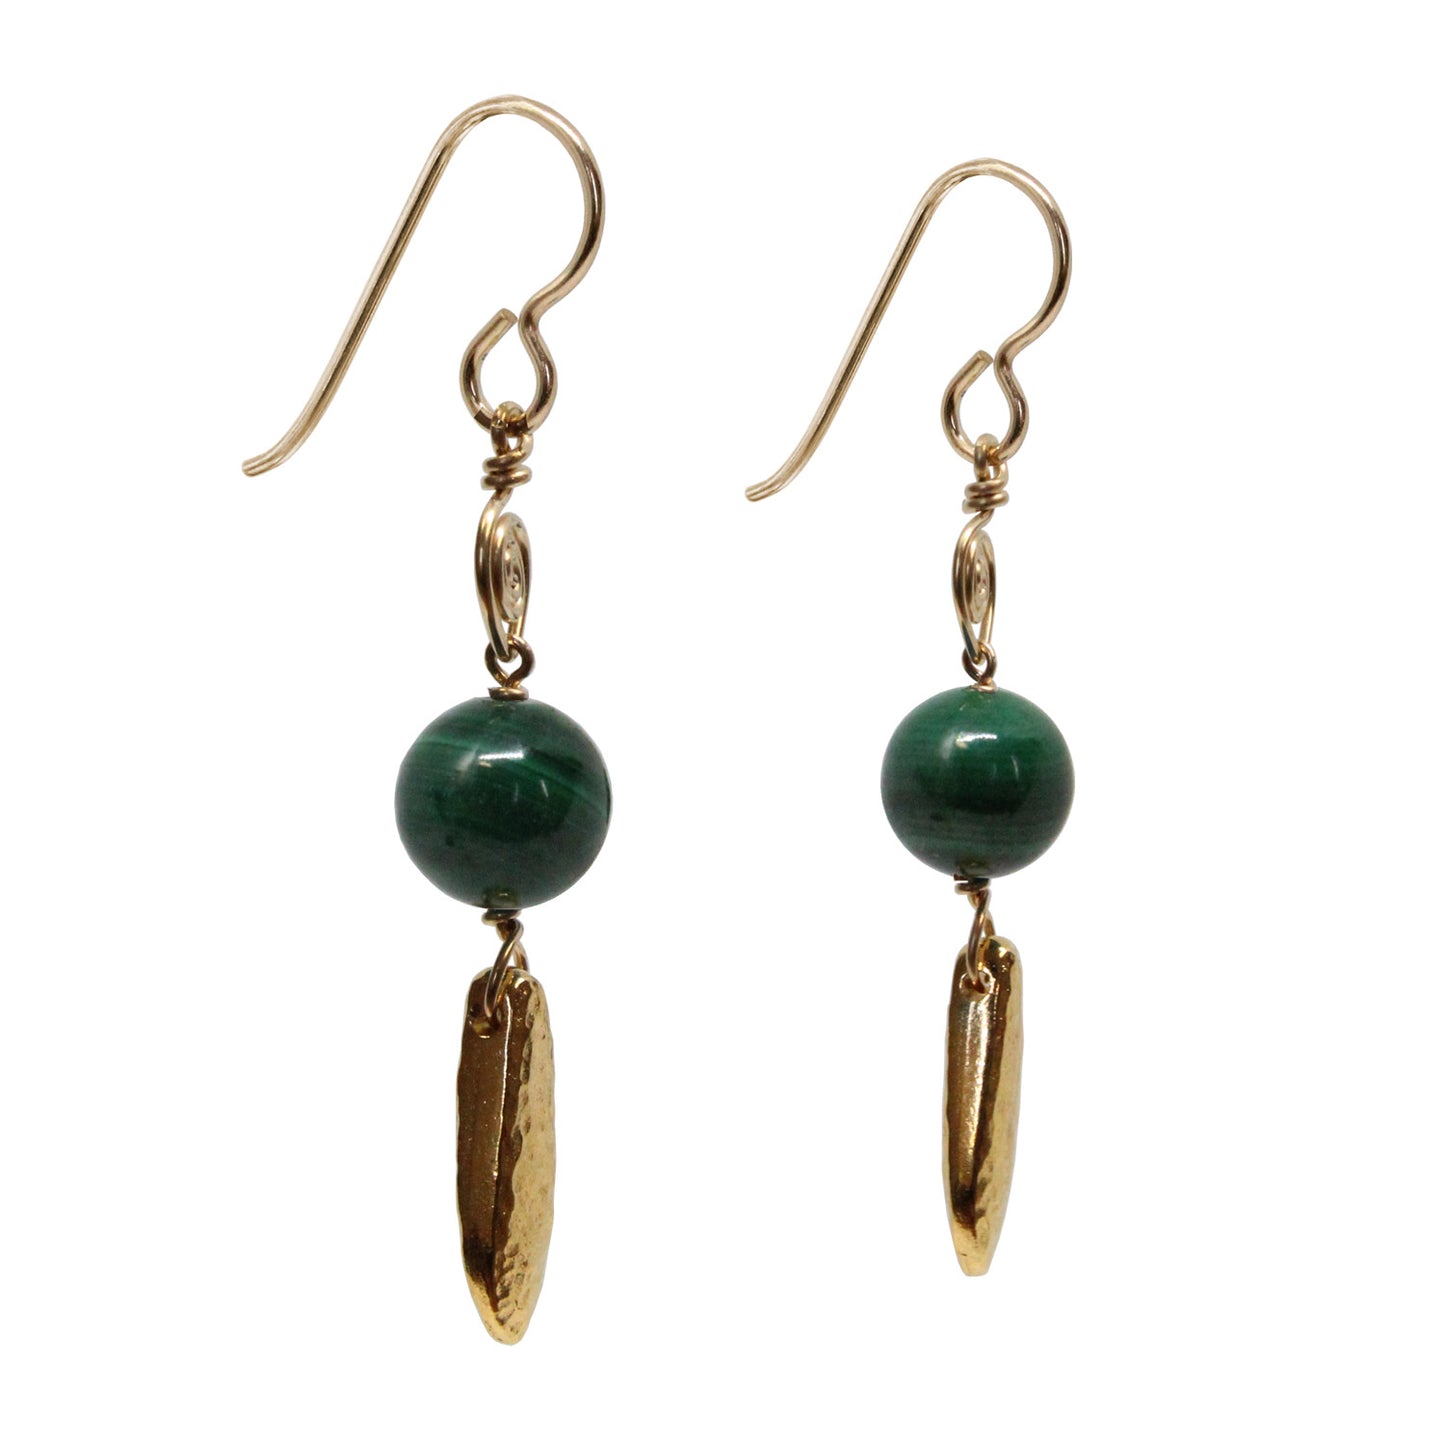 Green Malachite Earrings / 50mm length / with gold filled earwires and pewter hammertone dagger beads